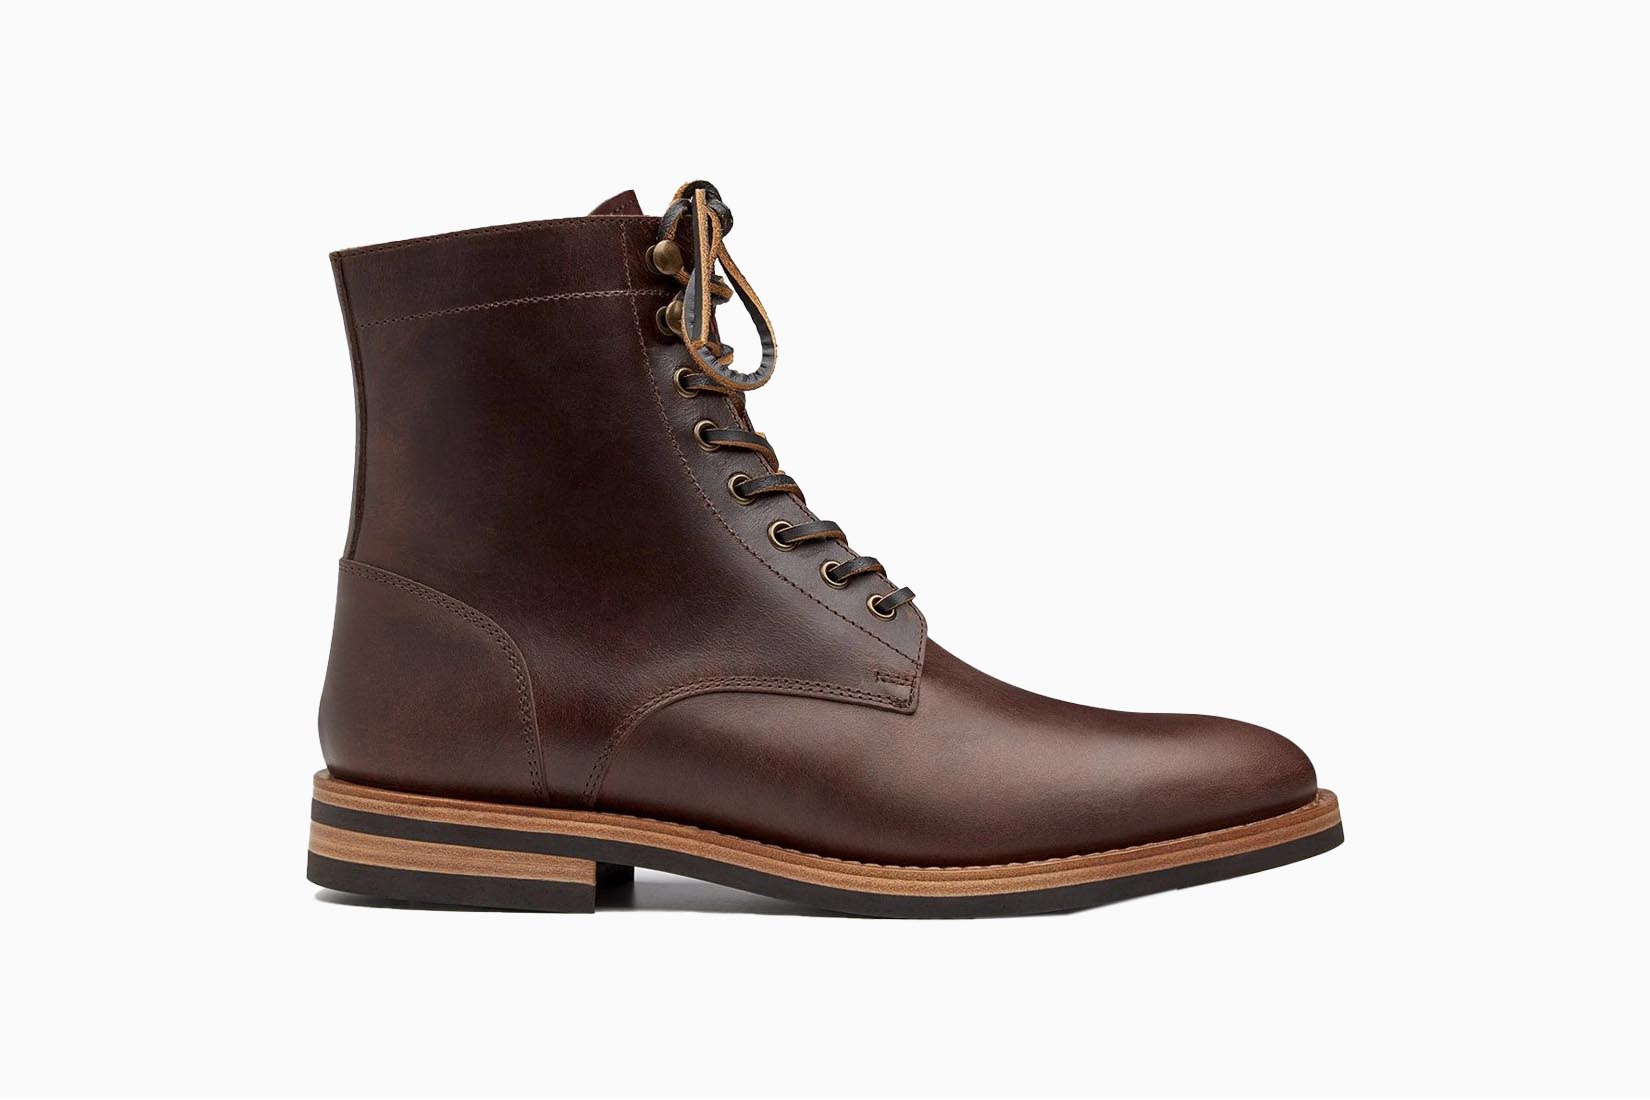 best boots men oliver cabell wilson boots review Luxe Digital